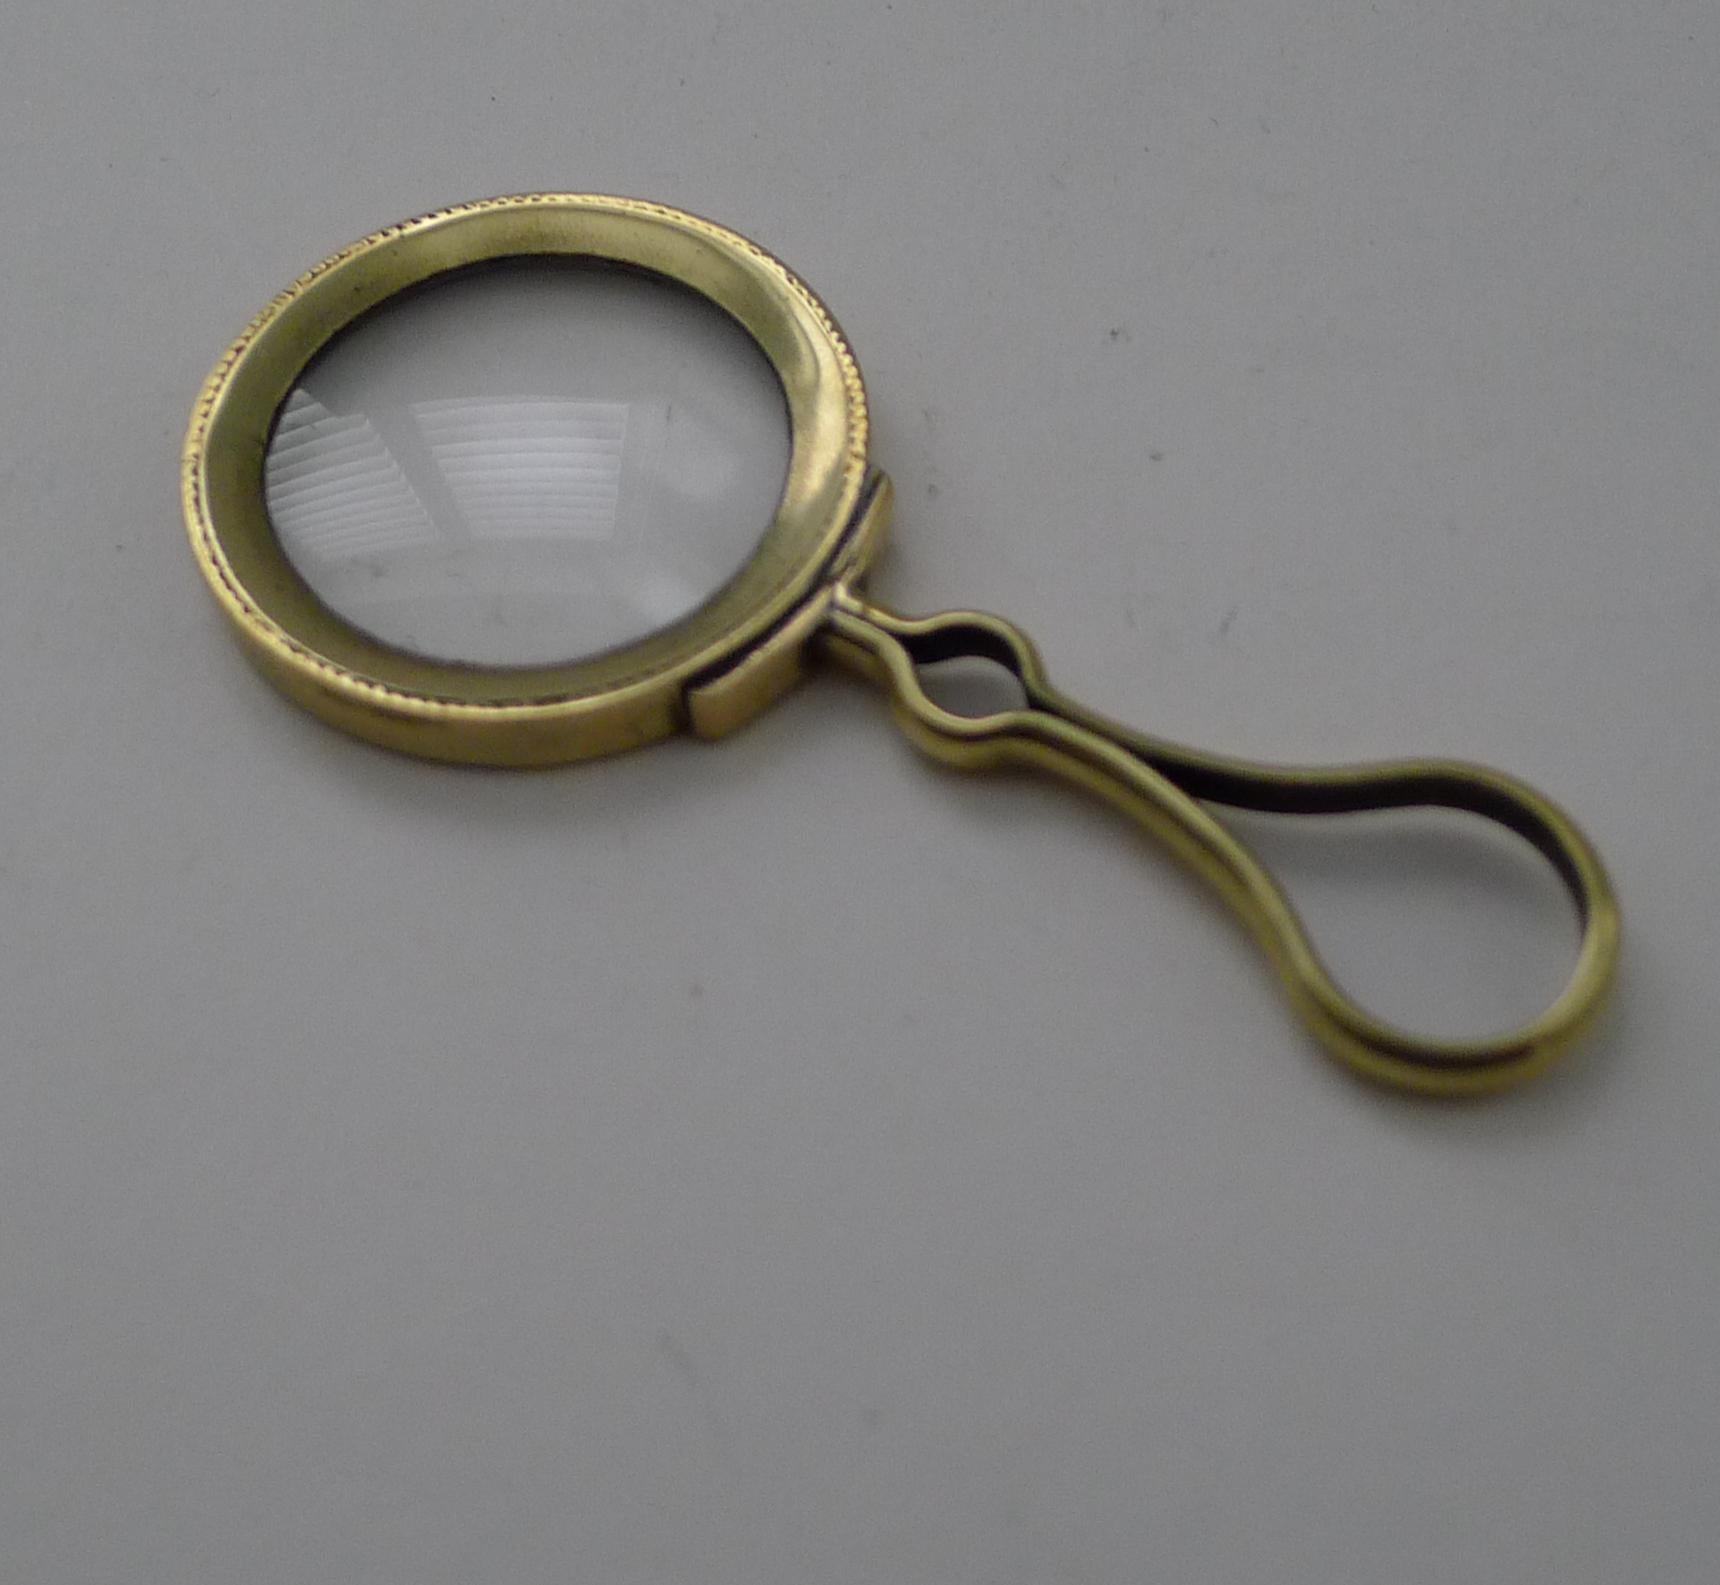 British Small Antique English Brass Framed Magnifying Glass c.1900